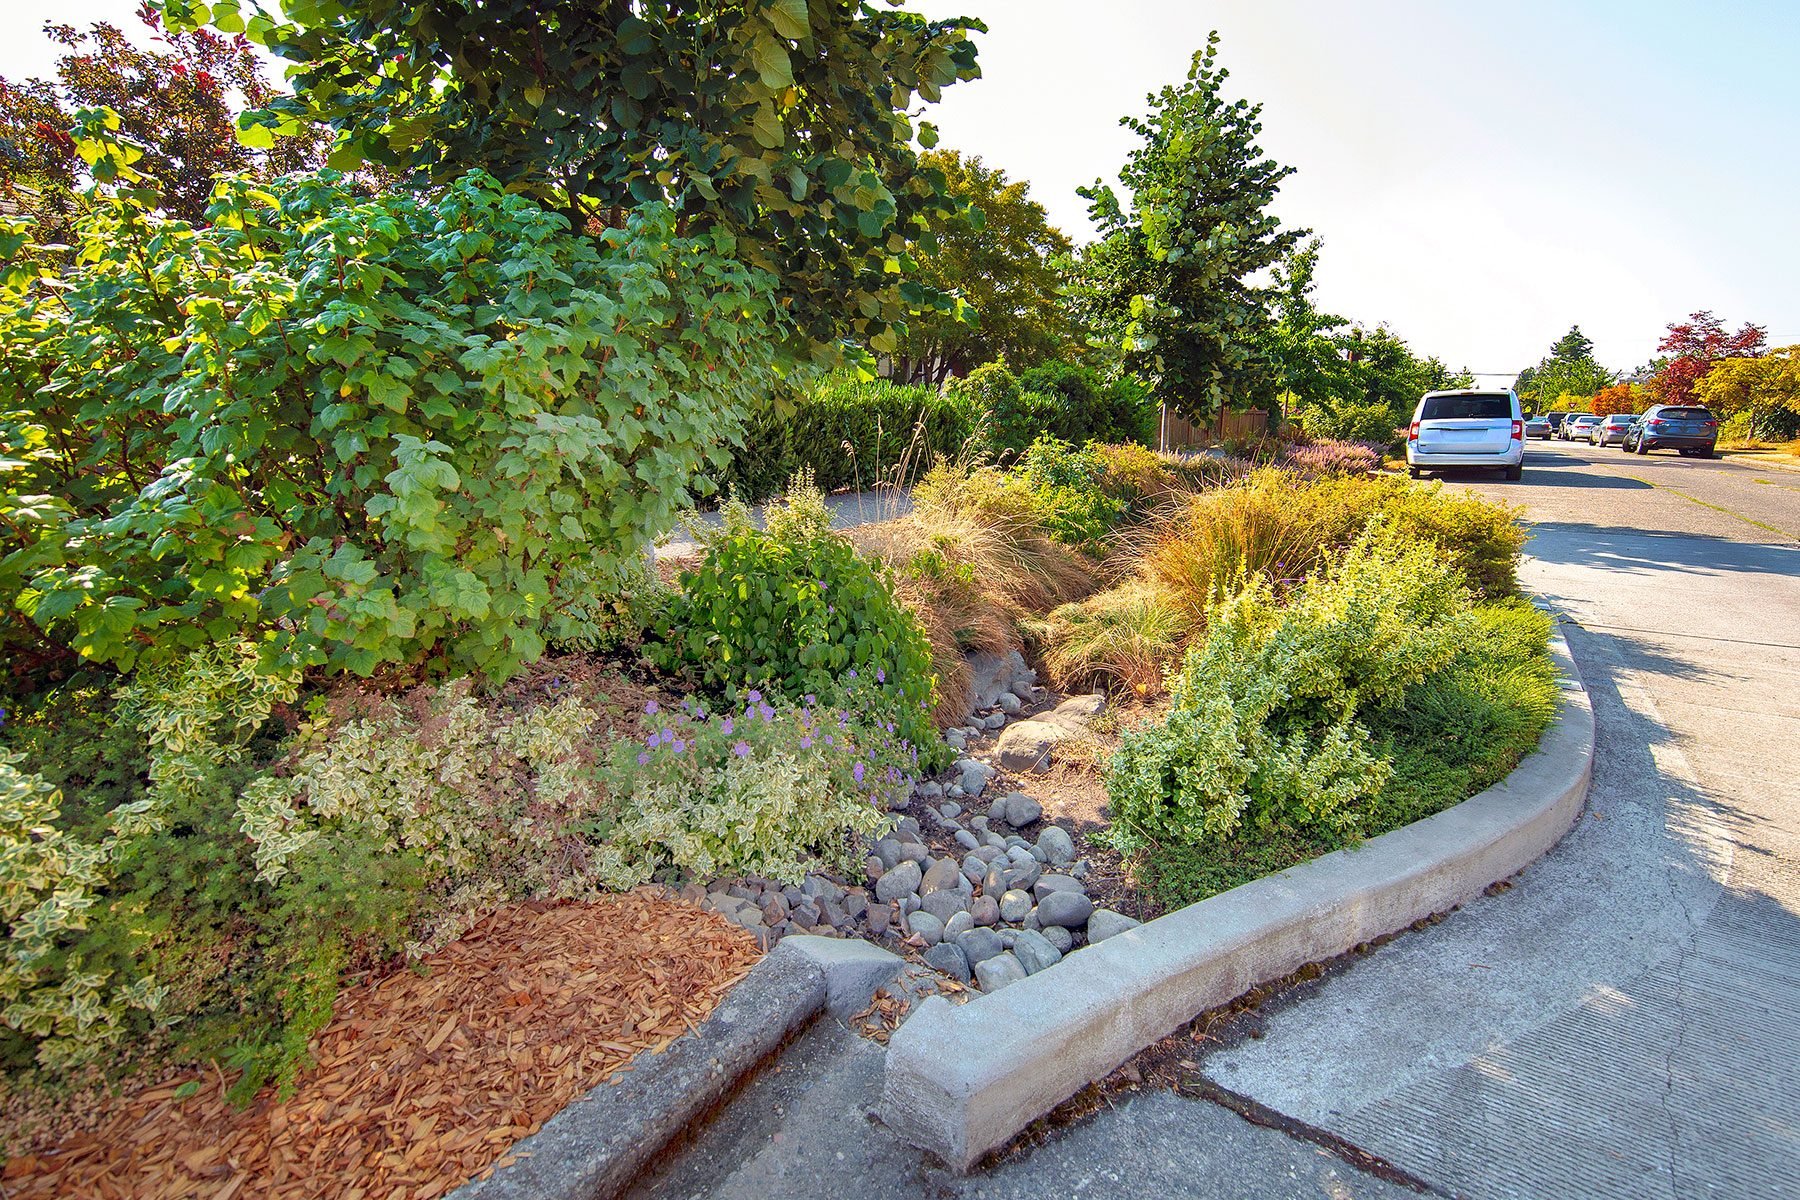 A Public Bioswale filled with Drought Resistant Plants, Grasses, Rocks And Mulch